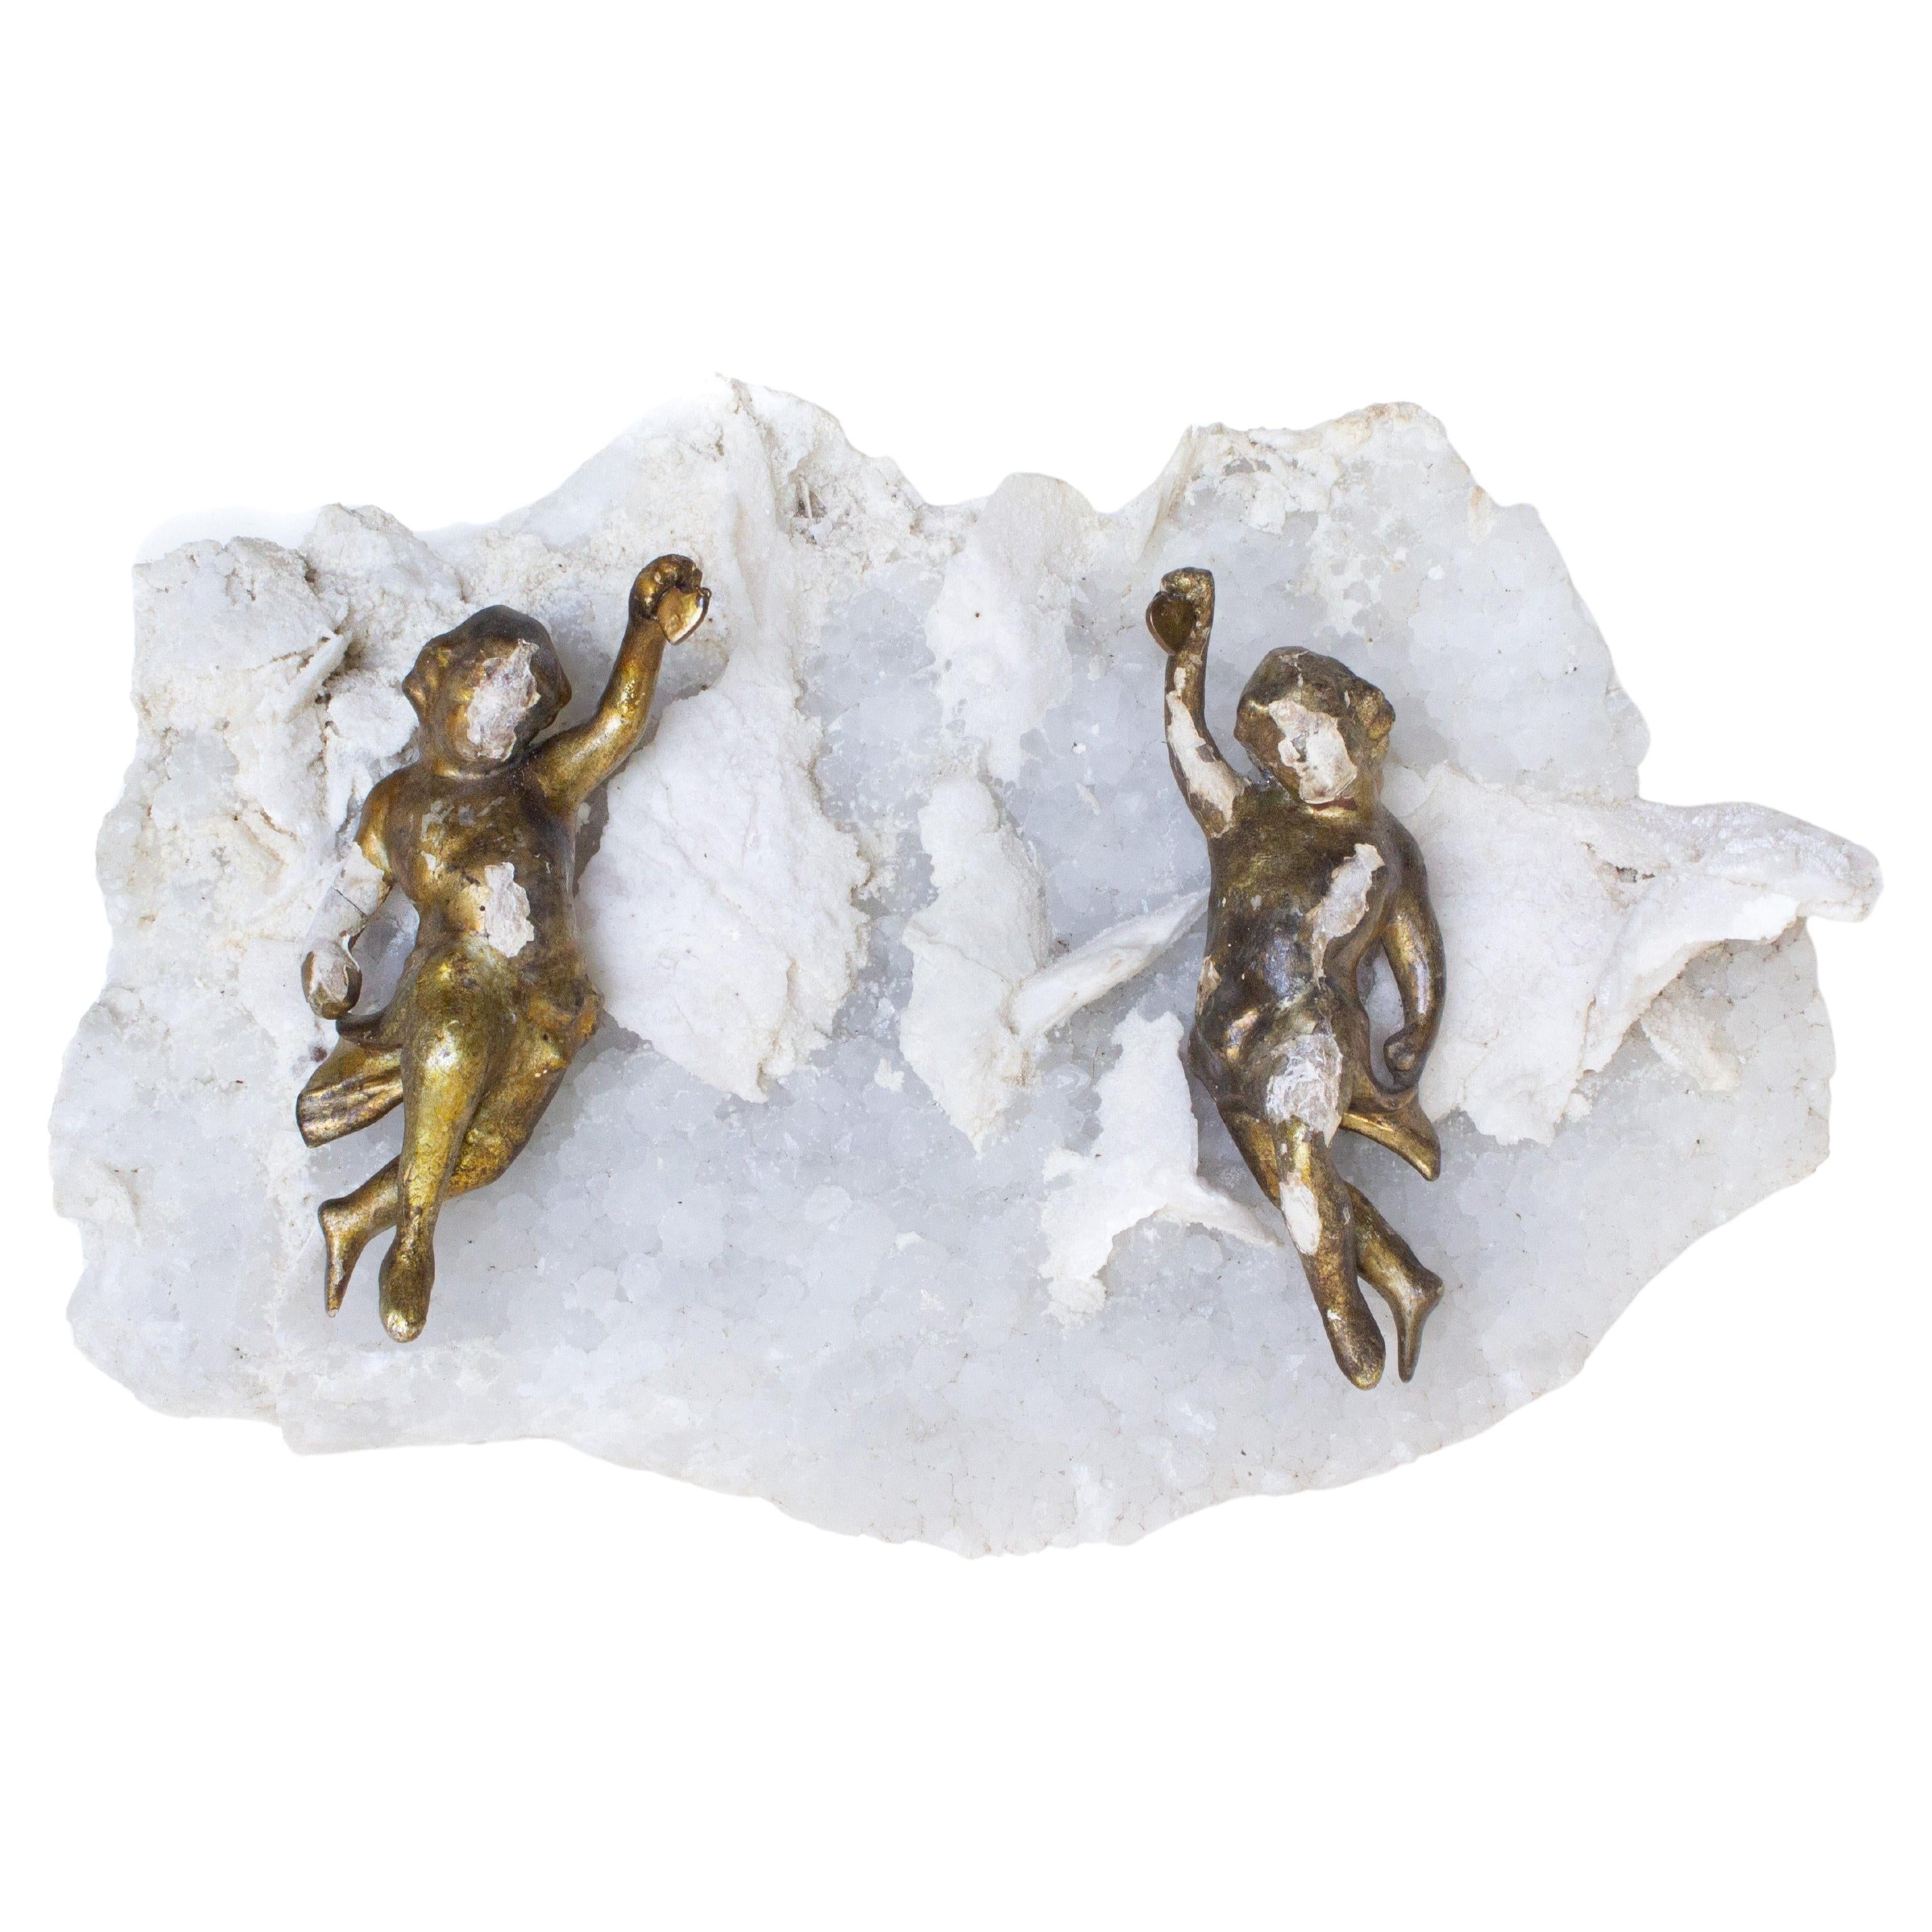 18th Century Italian Gilded Angels on Amethyst and Calcite in Matrix